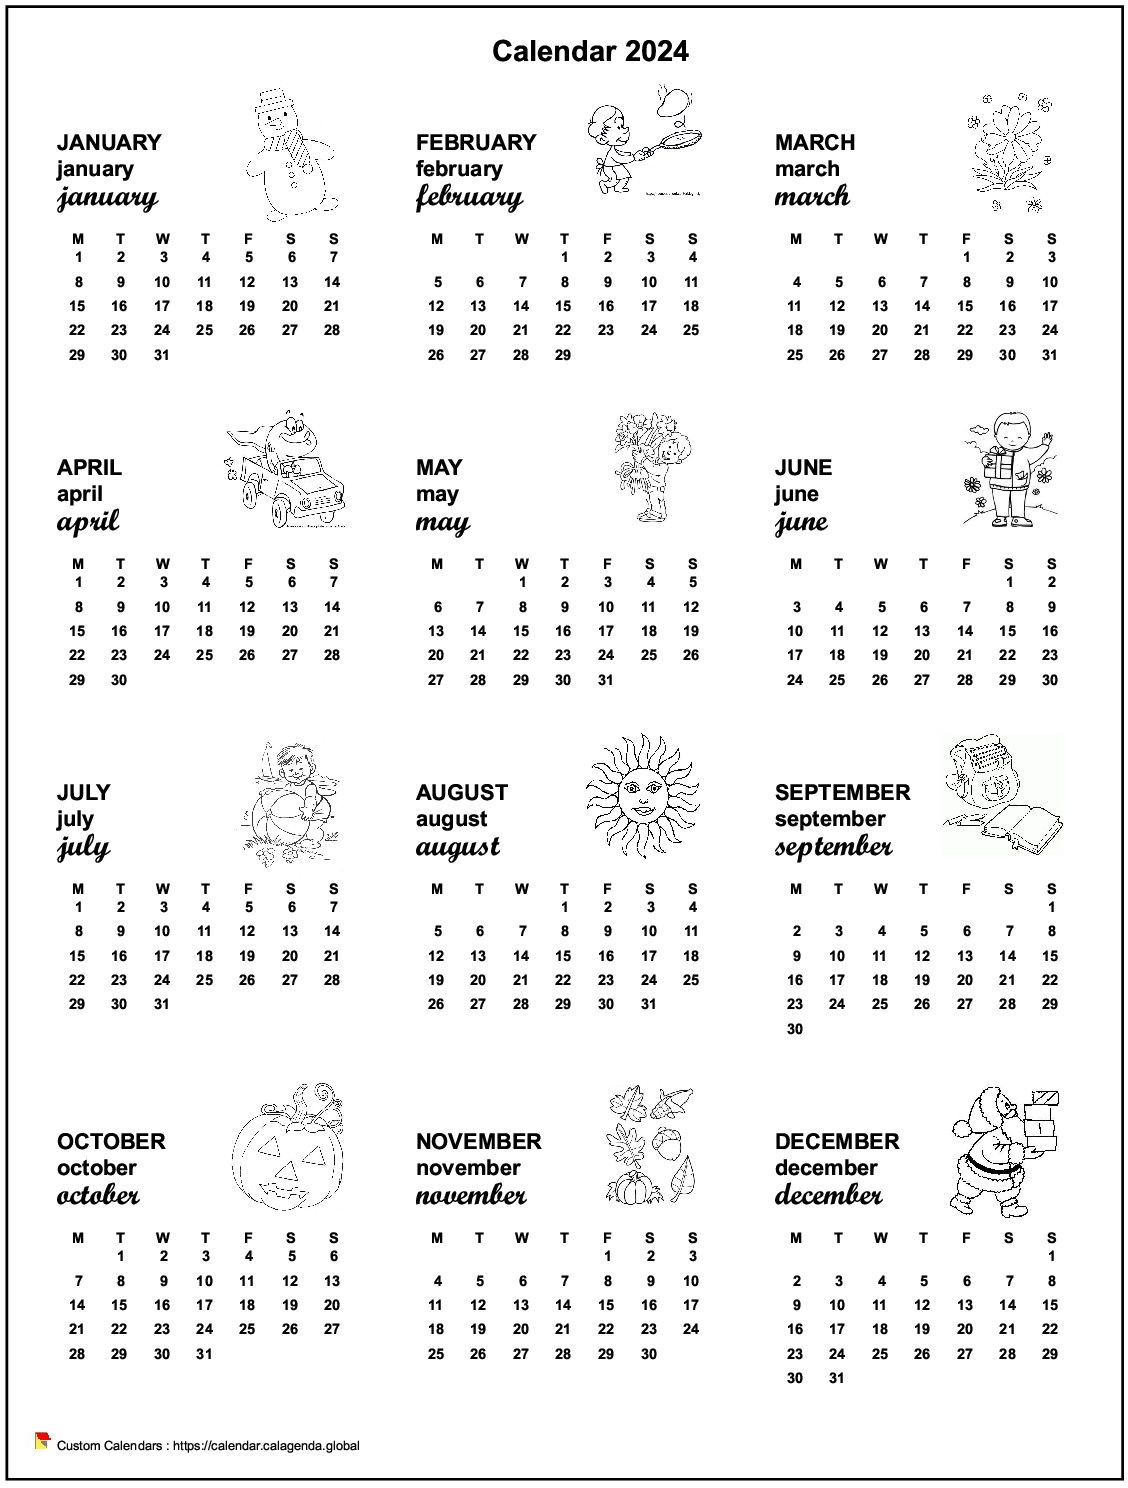 Calendar 2064 annual maternal and primary school